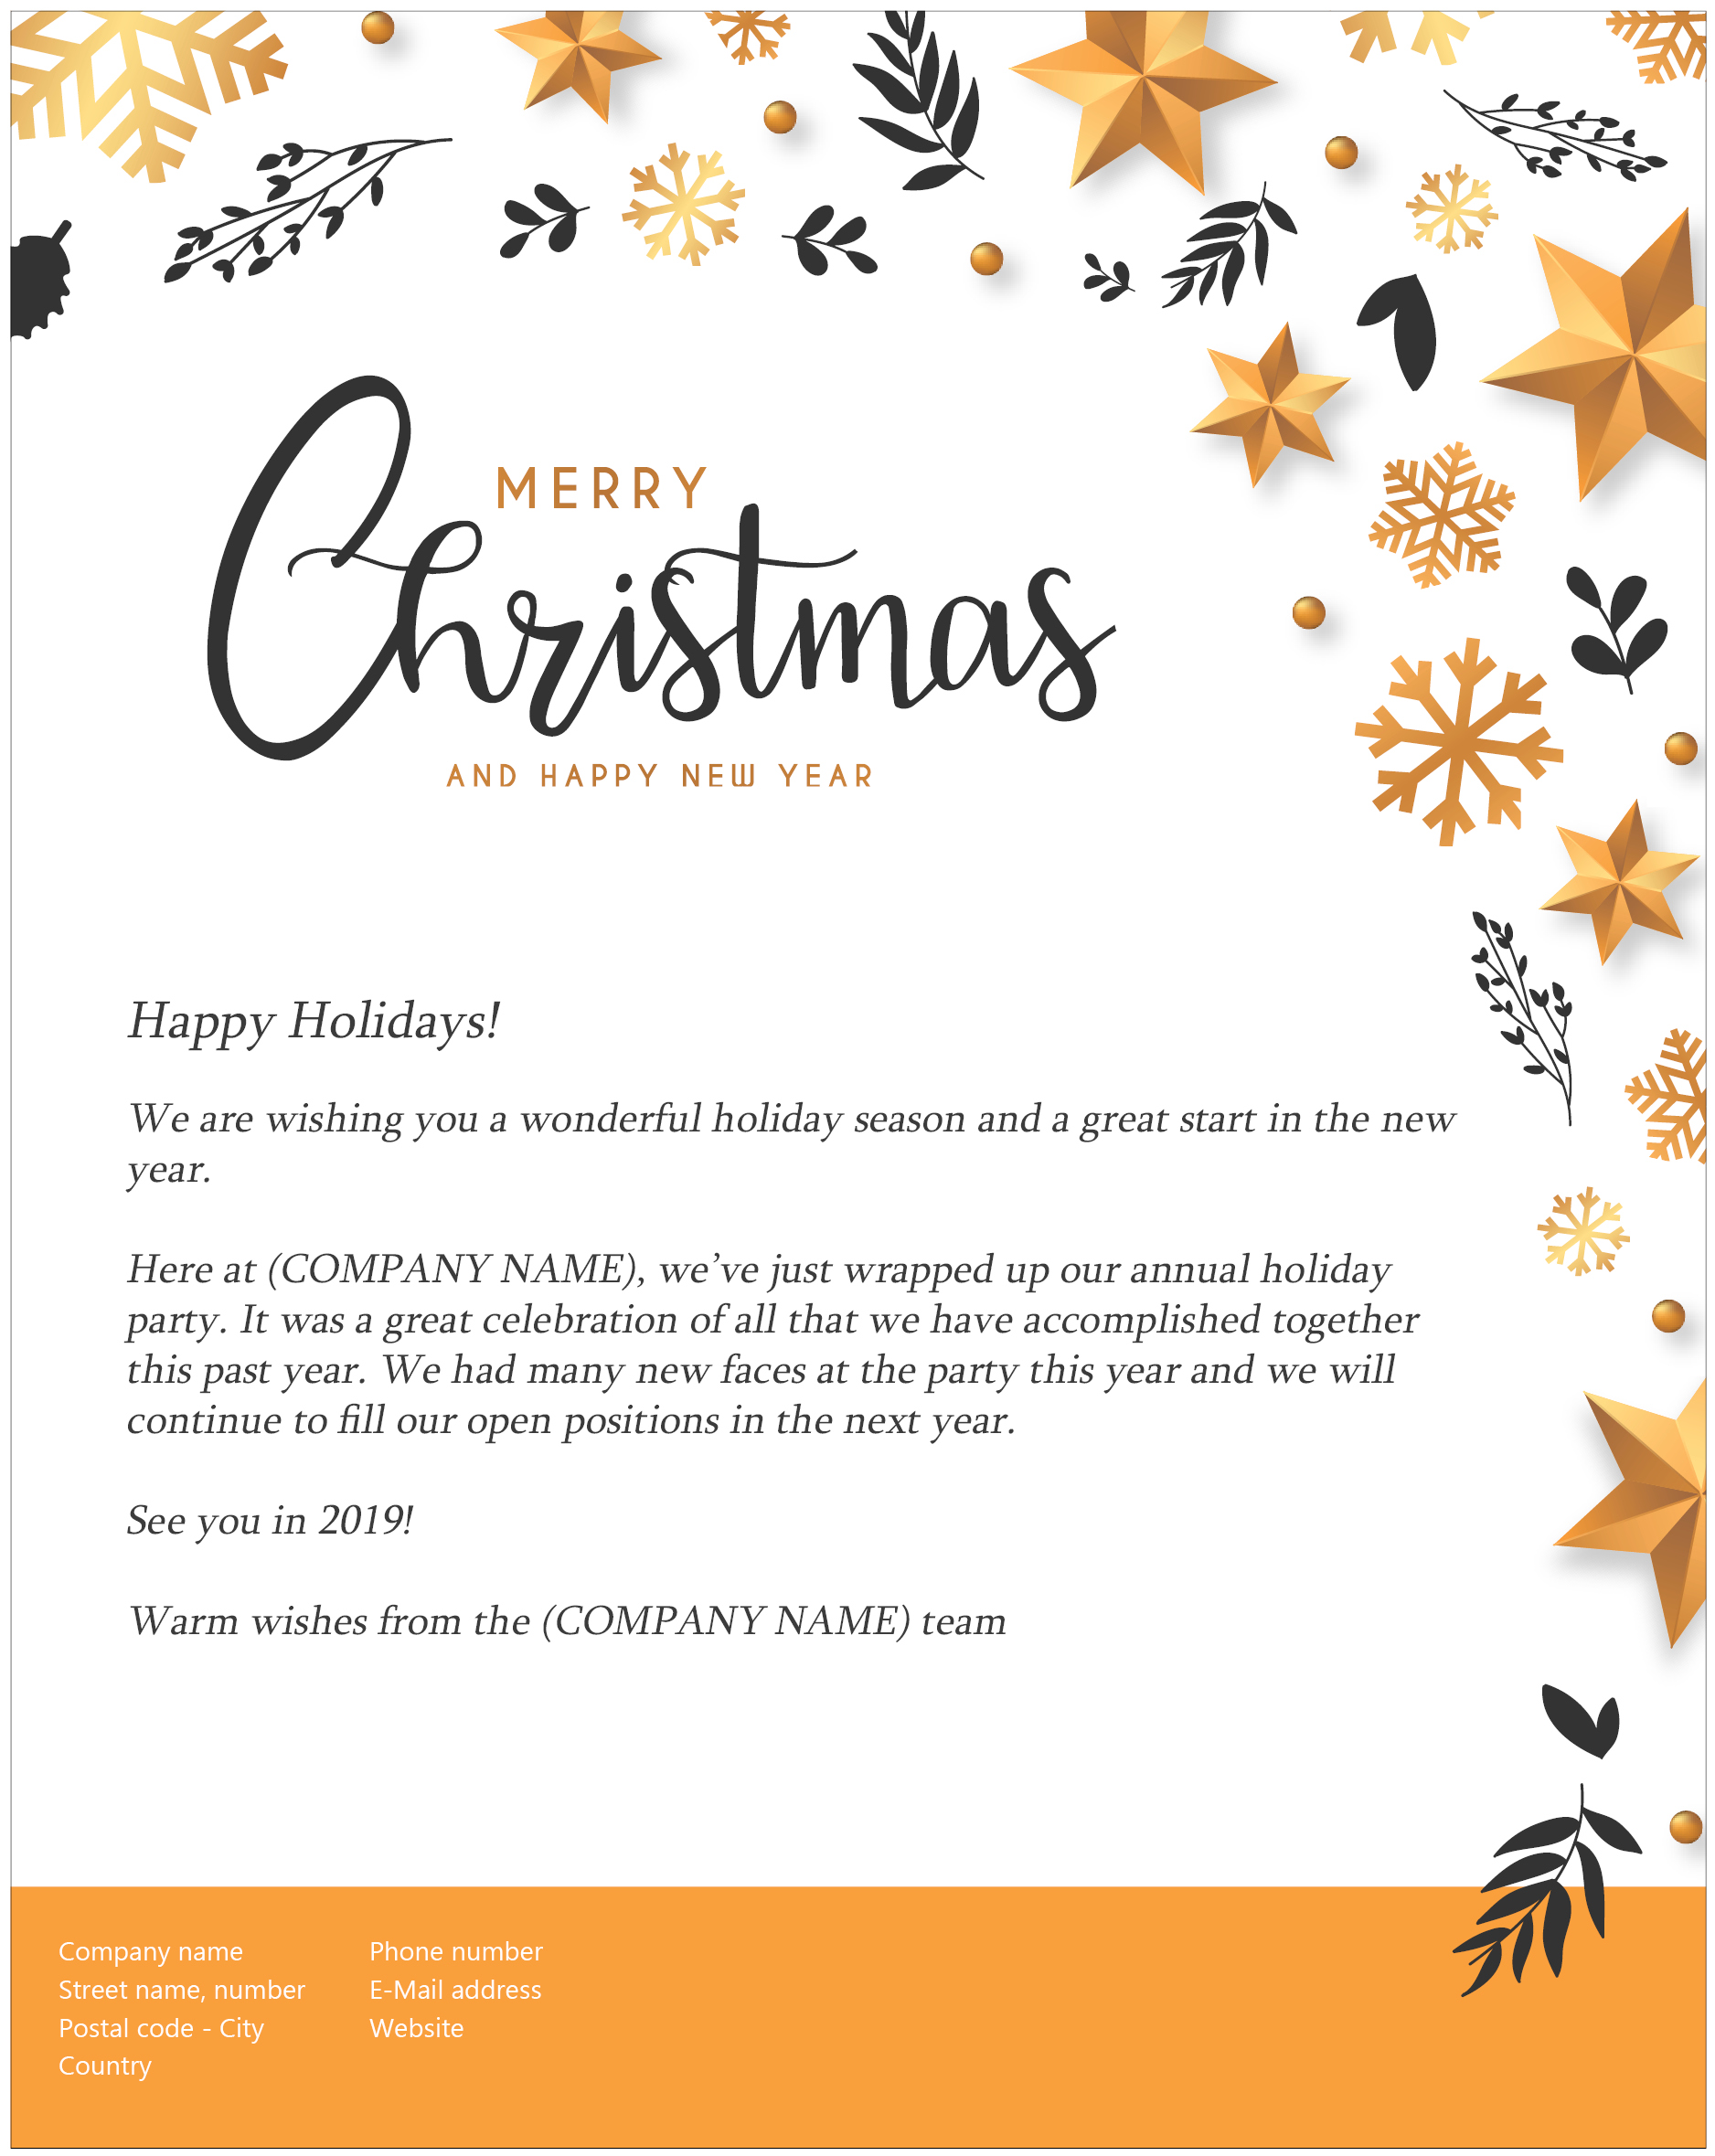 Recruiting At Christmas 4 Christmas Nurturing Newsletter Examples